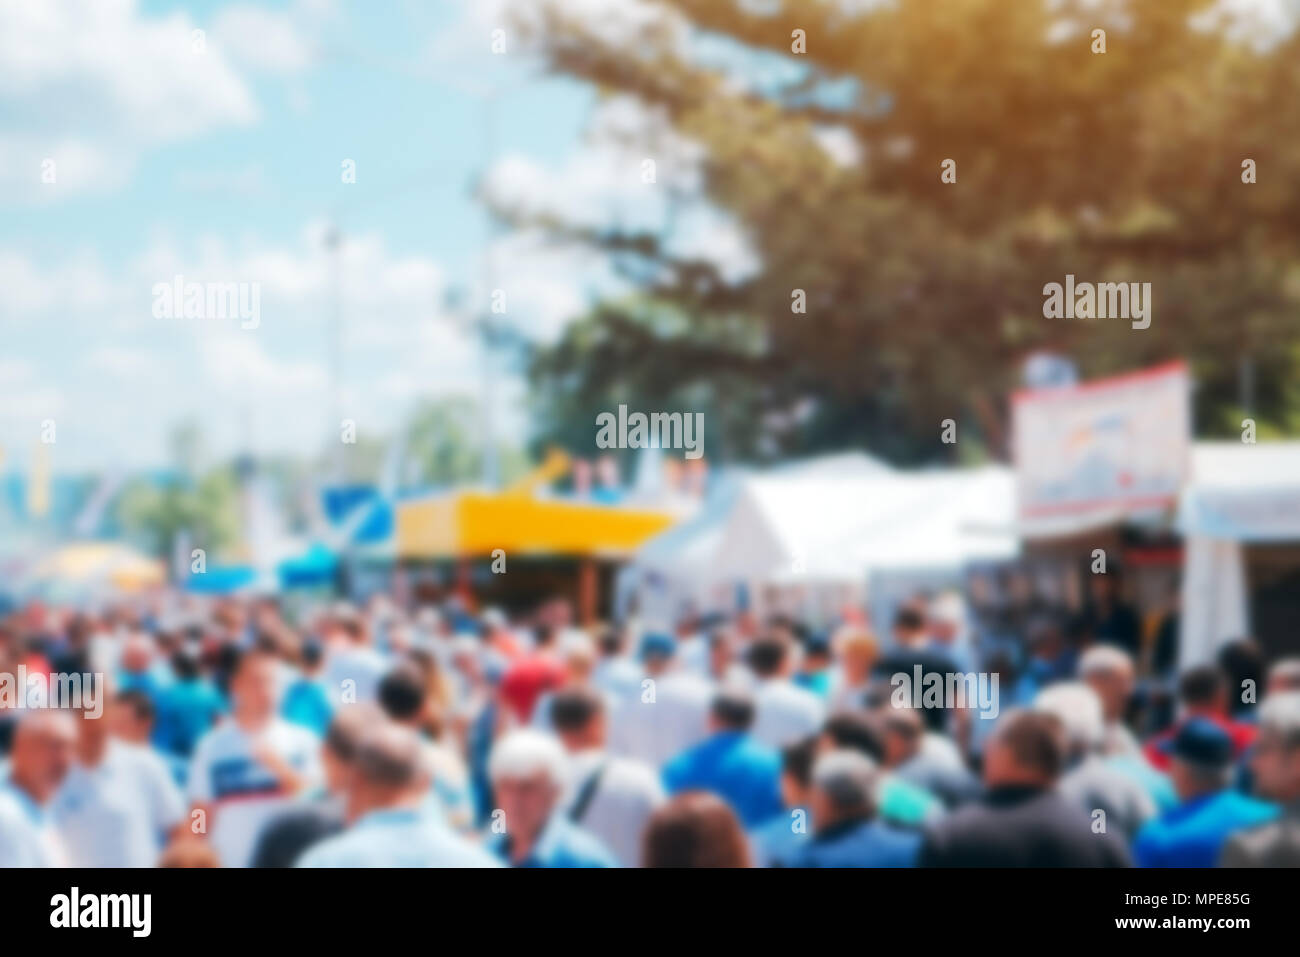 Crowd of people on open air festival, abstract blurred background as graphic design element Stock Photo